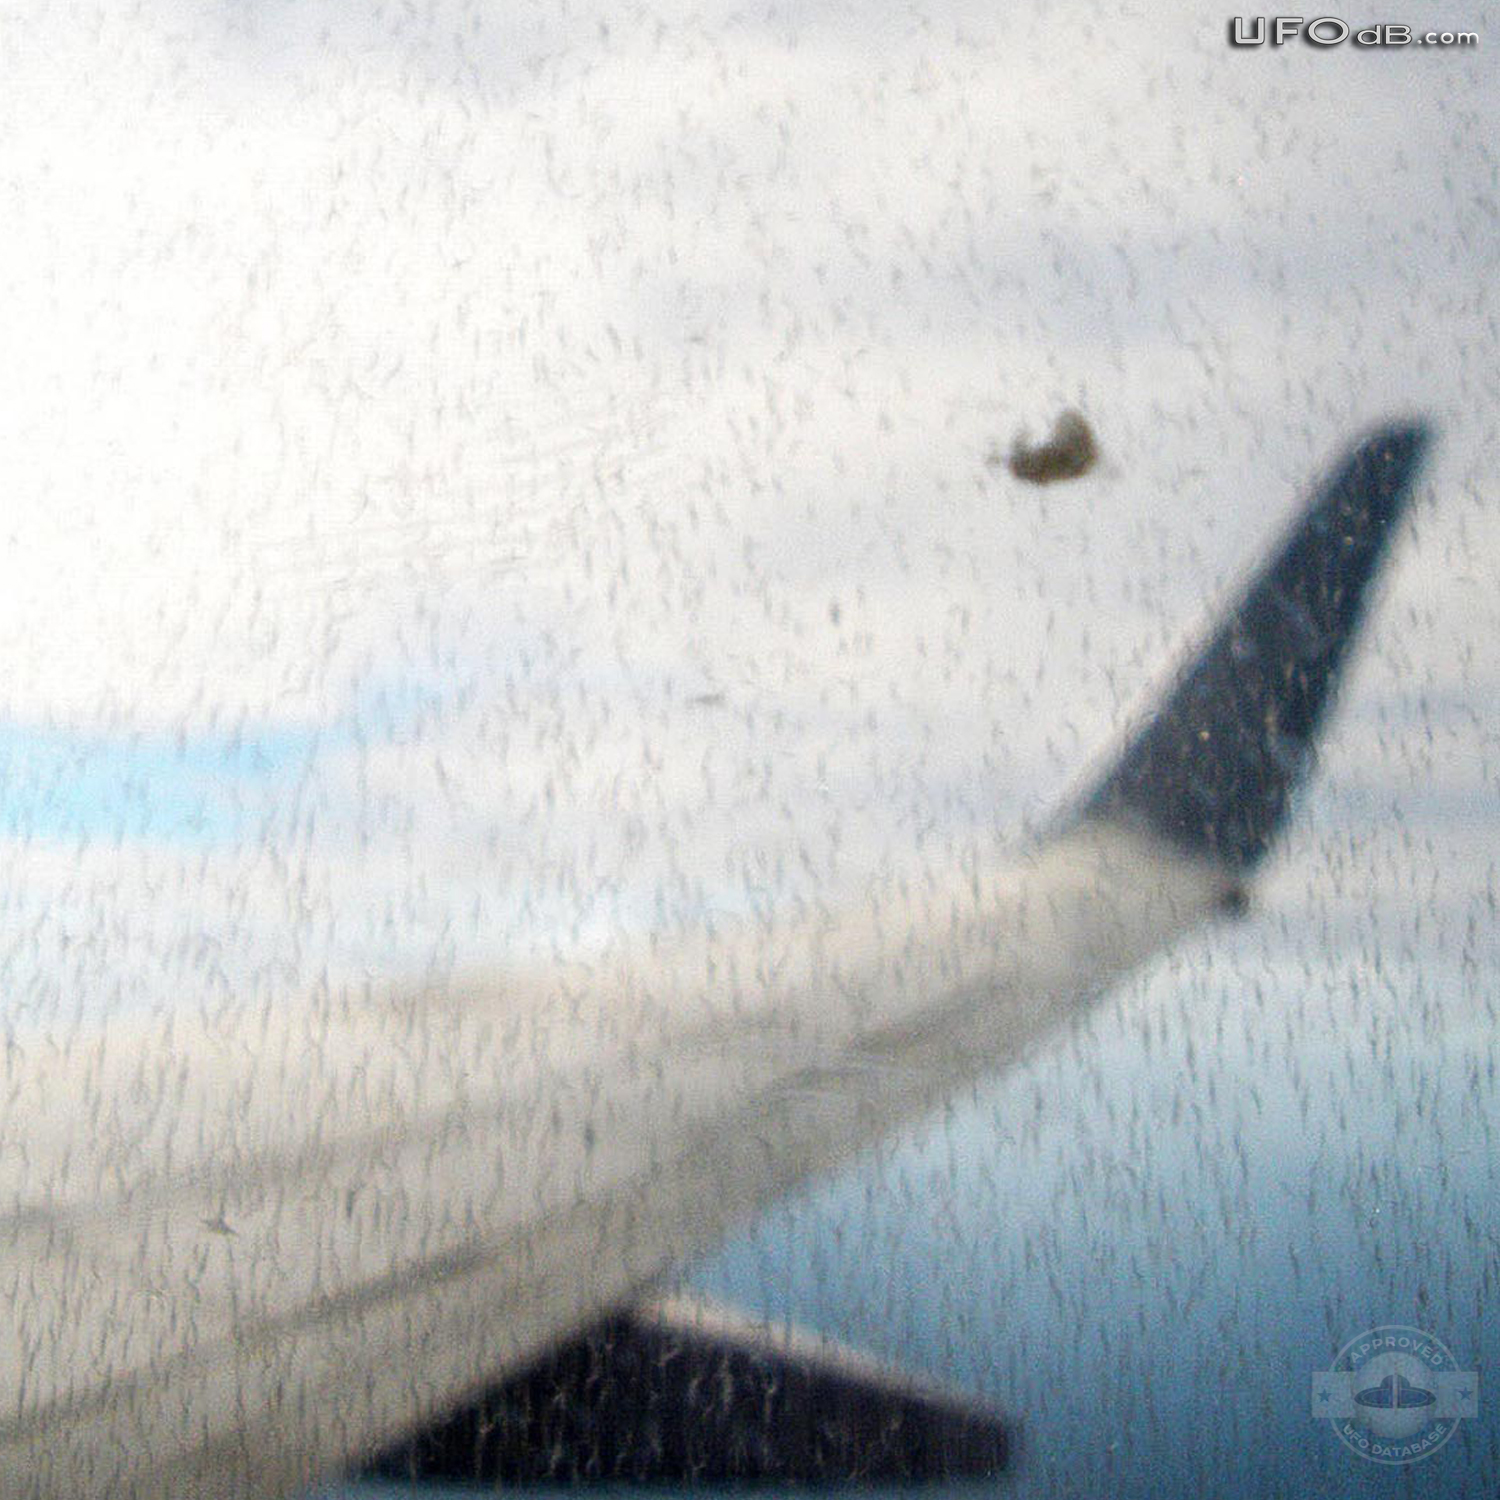 Cloaking UFO near wing of flying Airplane in Australia | January 2011 UFO Picture #243-2